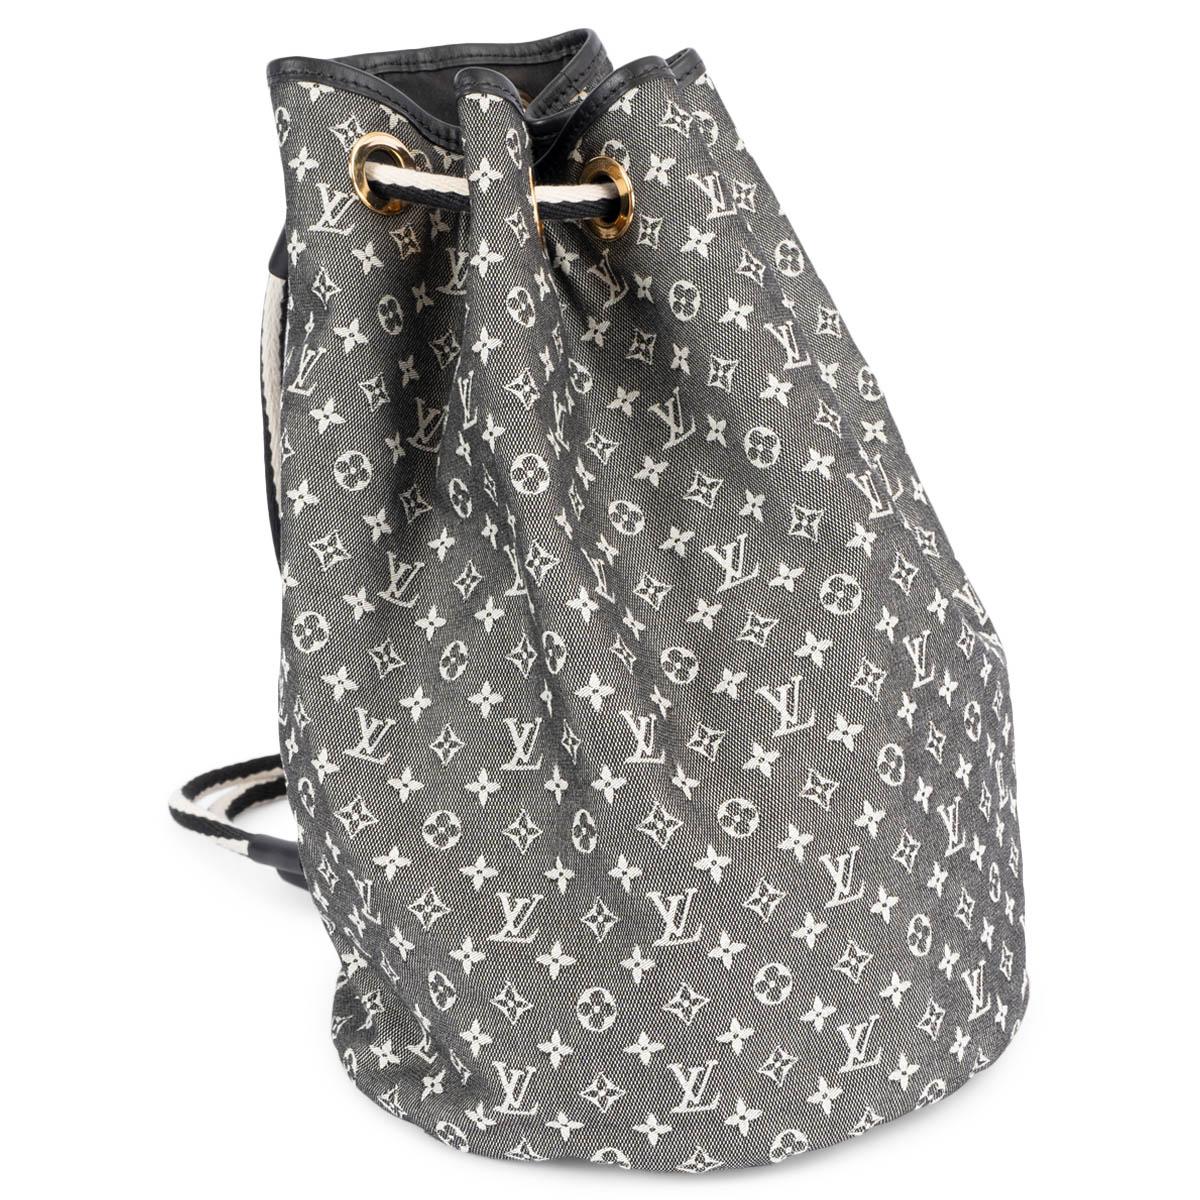 100% authentic Louis Vuitton Betsy in black & white Mini Lin monogram cotton canvas. The bag features black & white rope shoulder straps, cinch cords with black leather trim and golden tone hardware. The top is open to a roomy fabric interior in